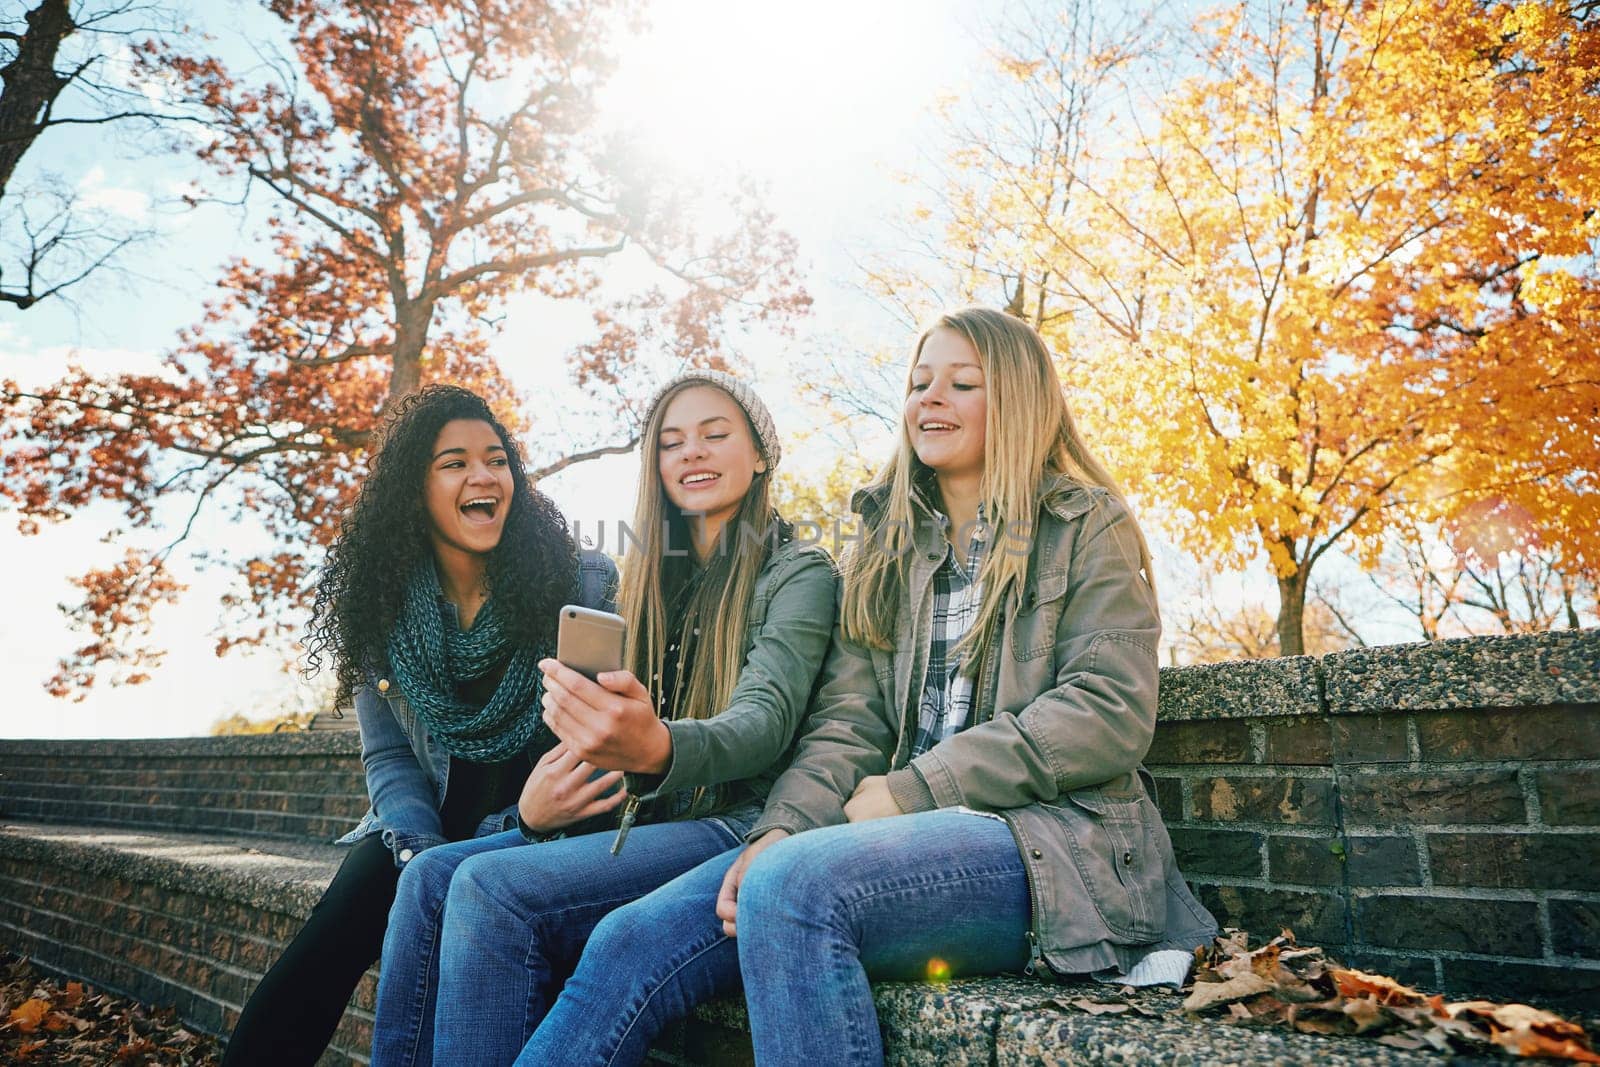 Phone meme, funny or friends in park with smile together for holiday vacation outdoors on social media. Happy people, gossip or gen z girls in nature talking, speaking or laughing at a comedy joke.